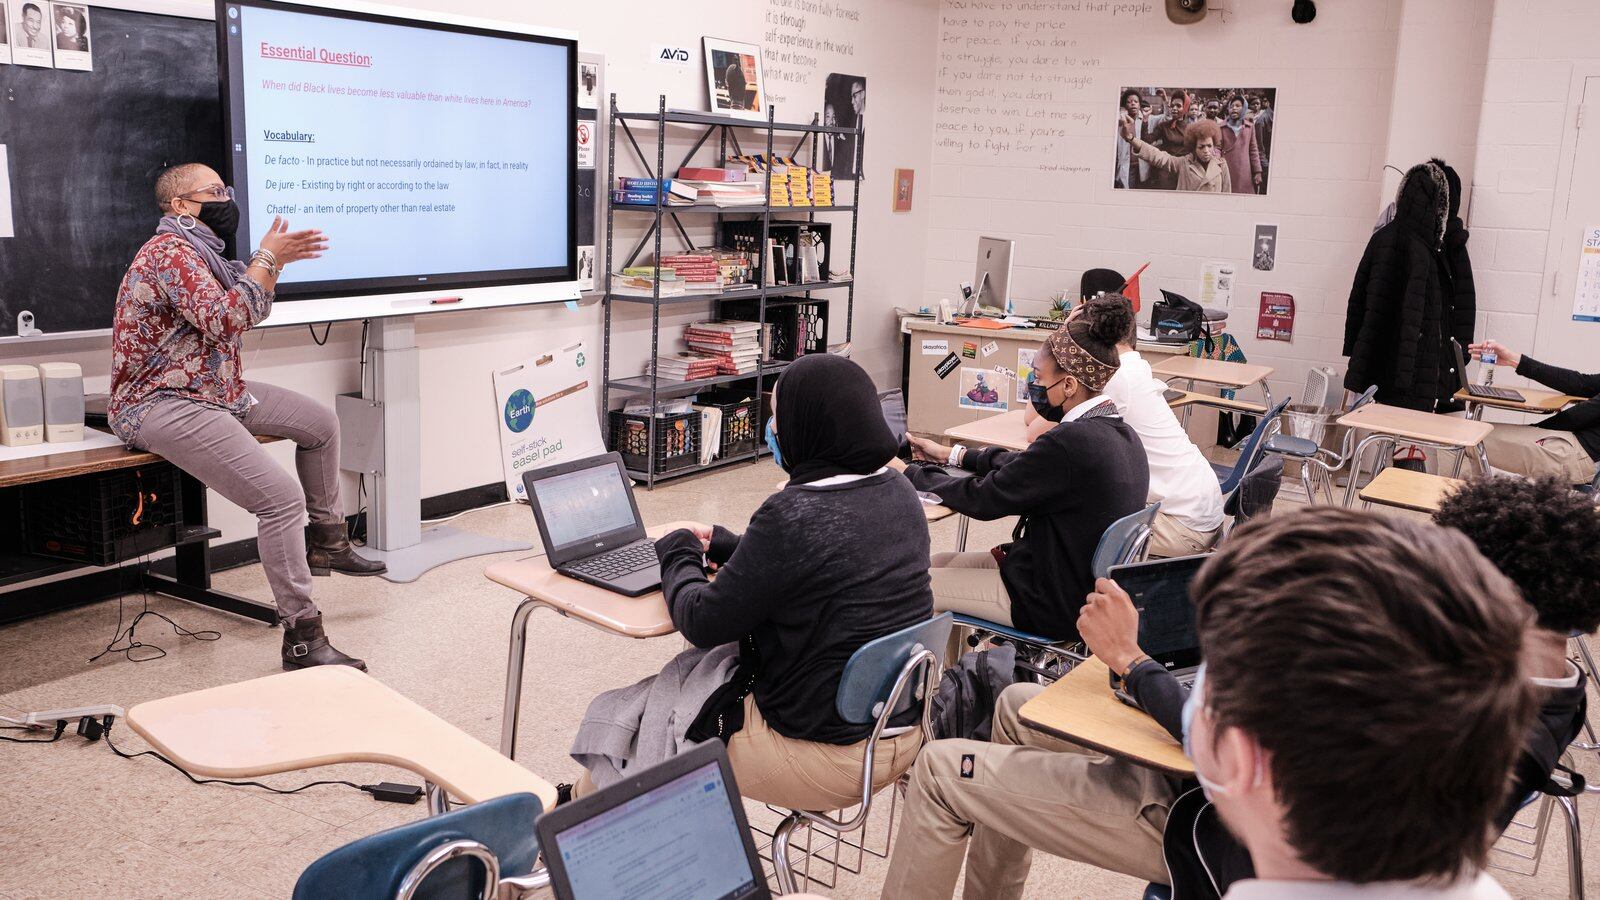 A teacher points at a screen while sitting on a desk in front of a group of students sitting at desks with laptops.  